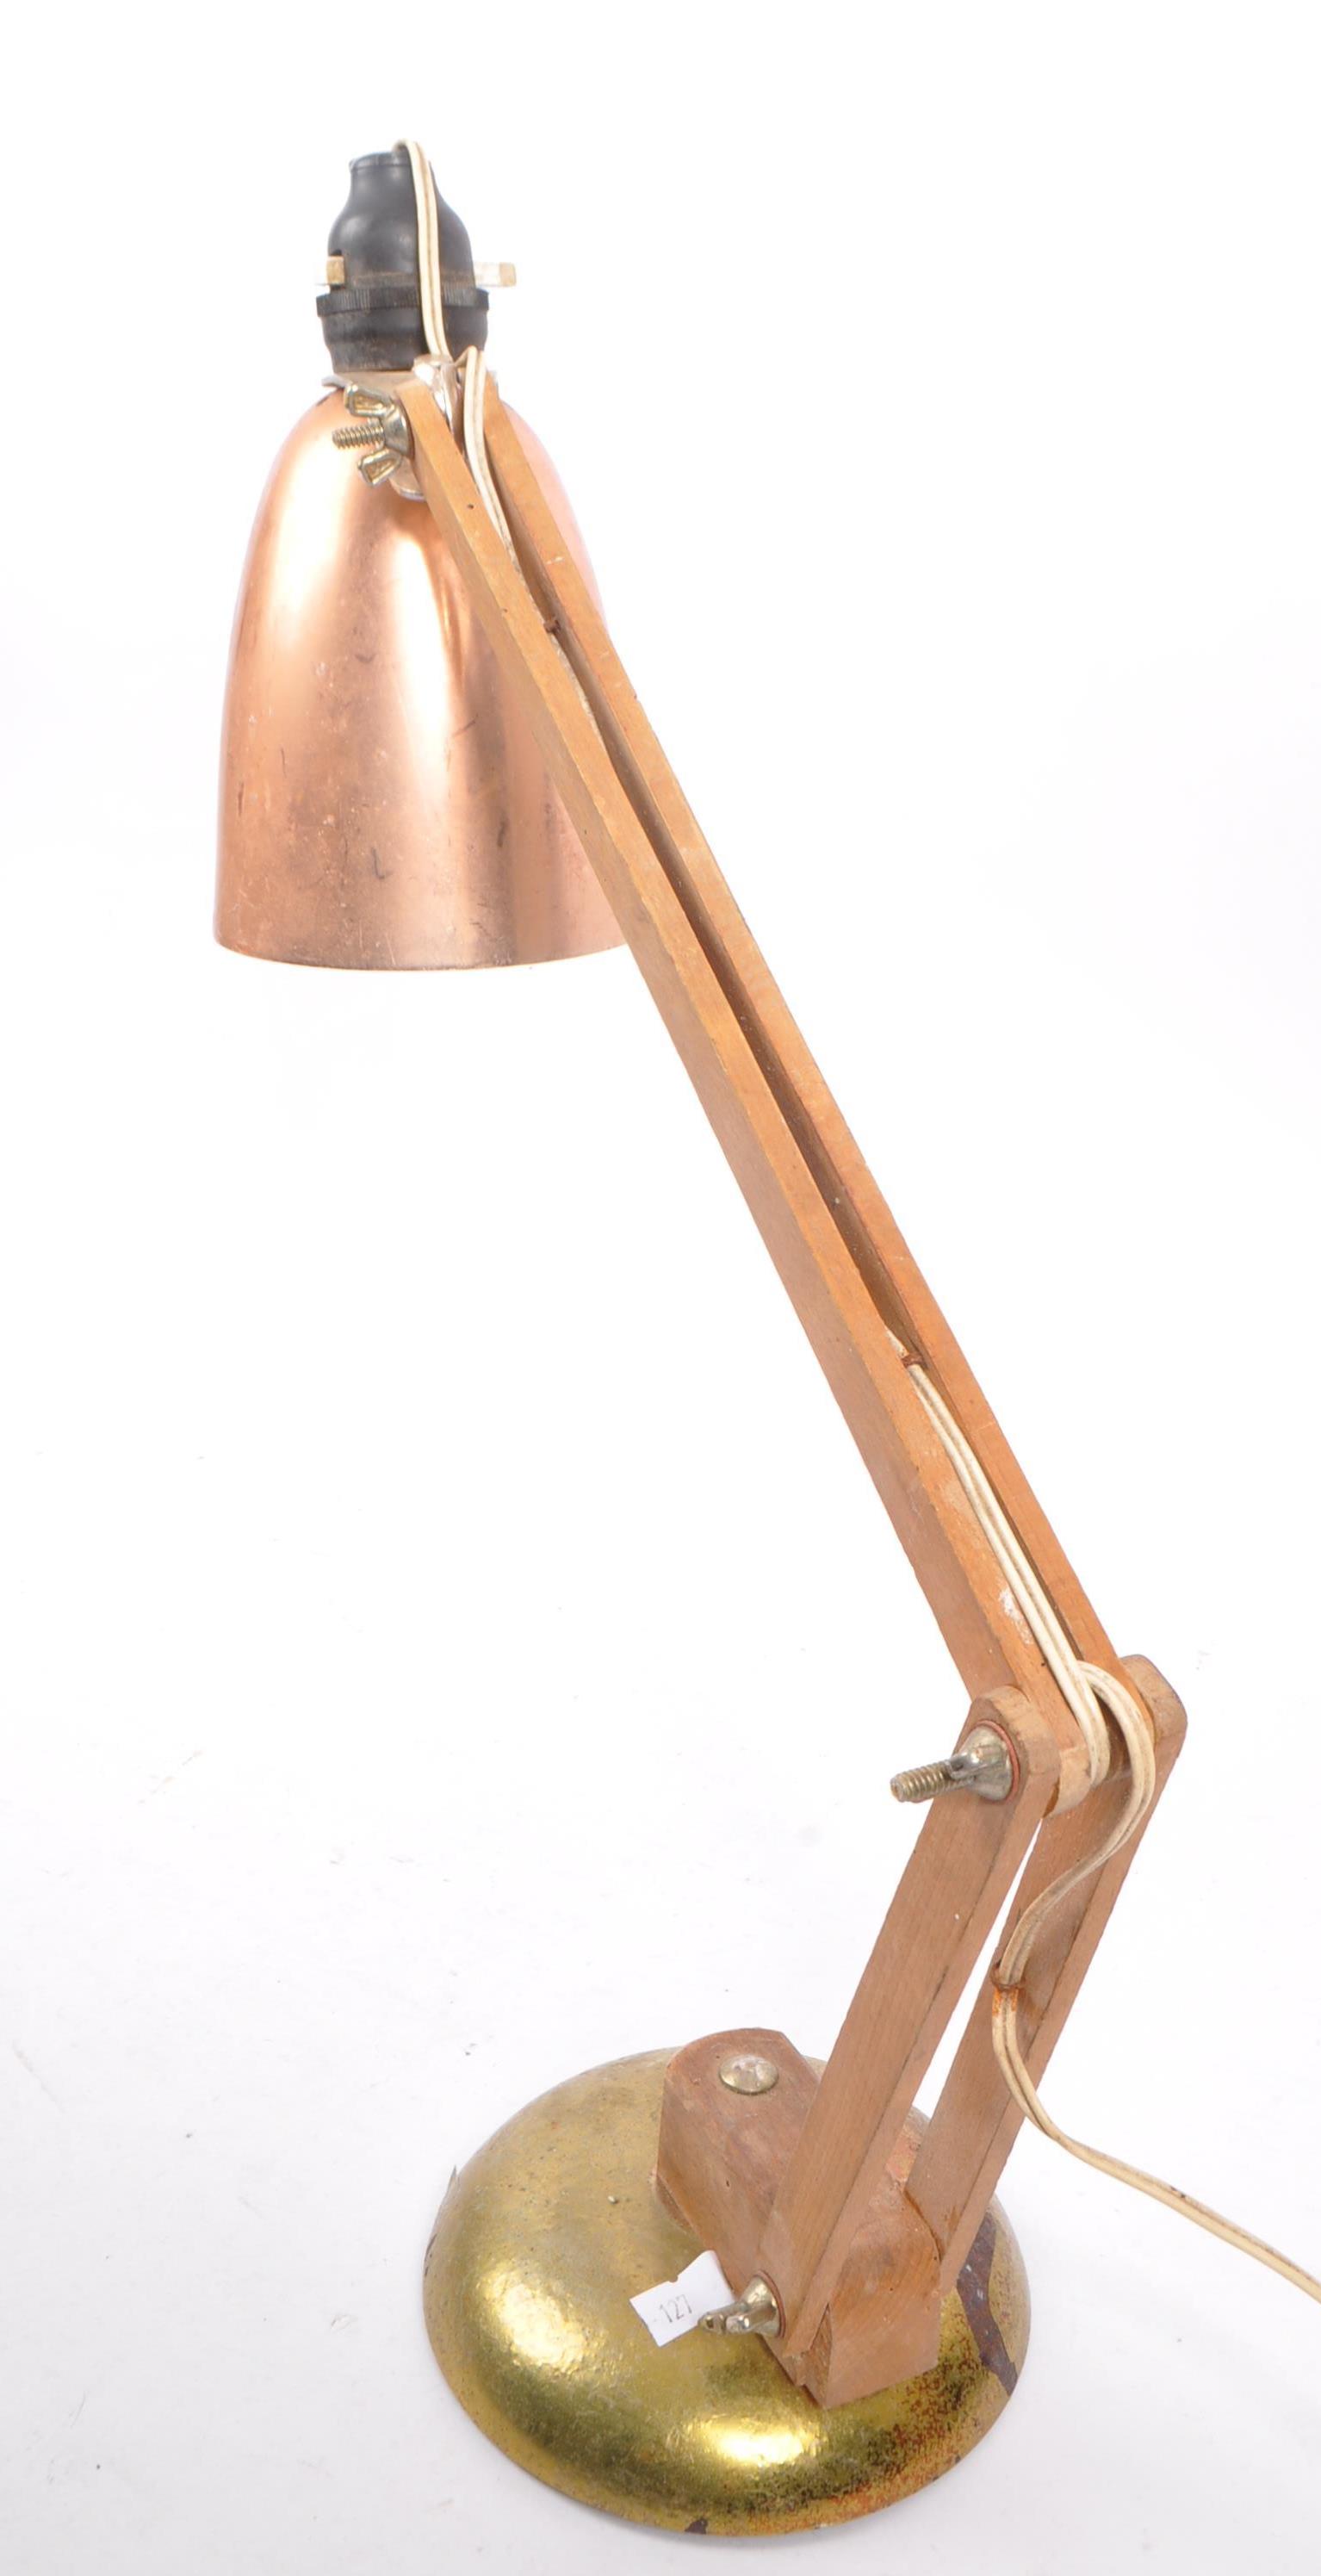 IN THE STYLE OF TERENCE CONRAN FOR HABITAT ANGLEPOISE LAMP - Image 5 of 8